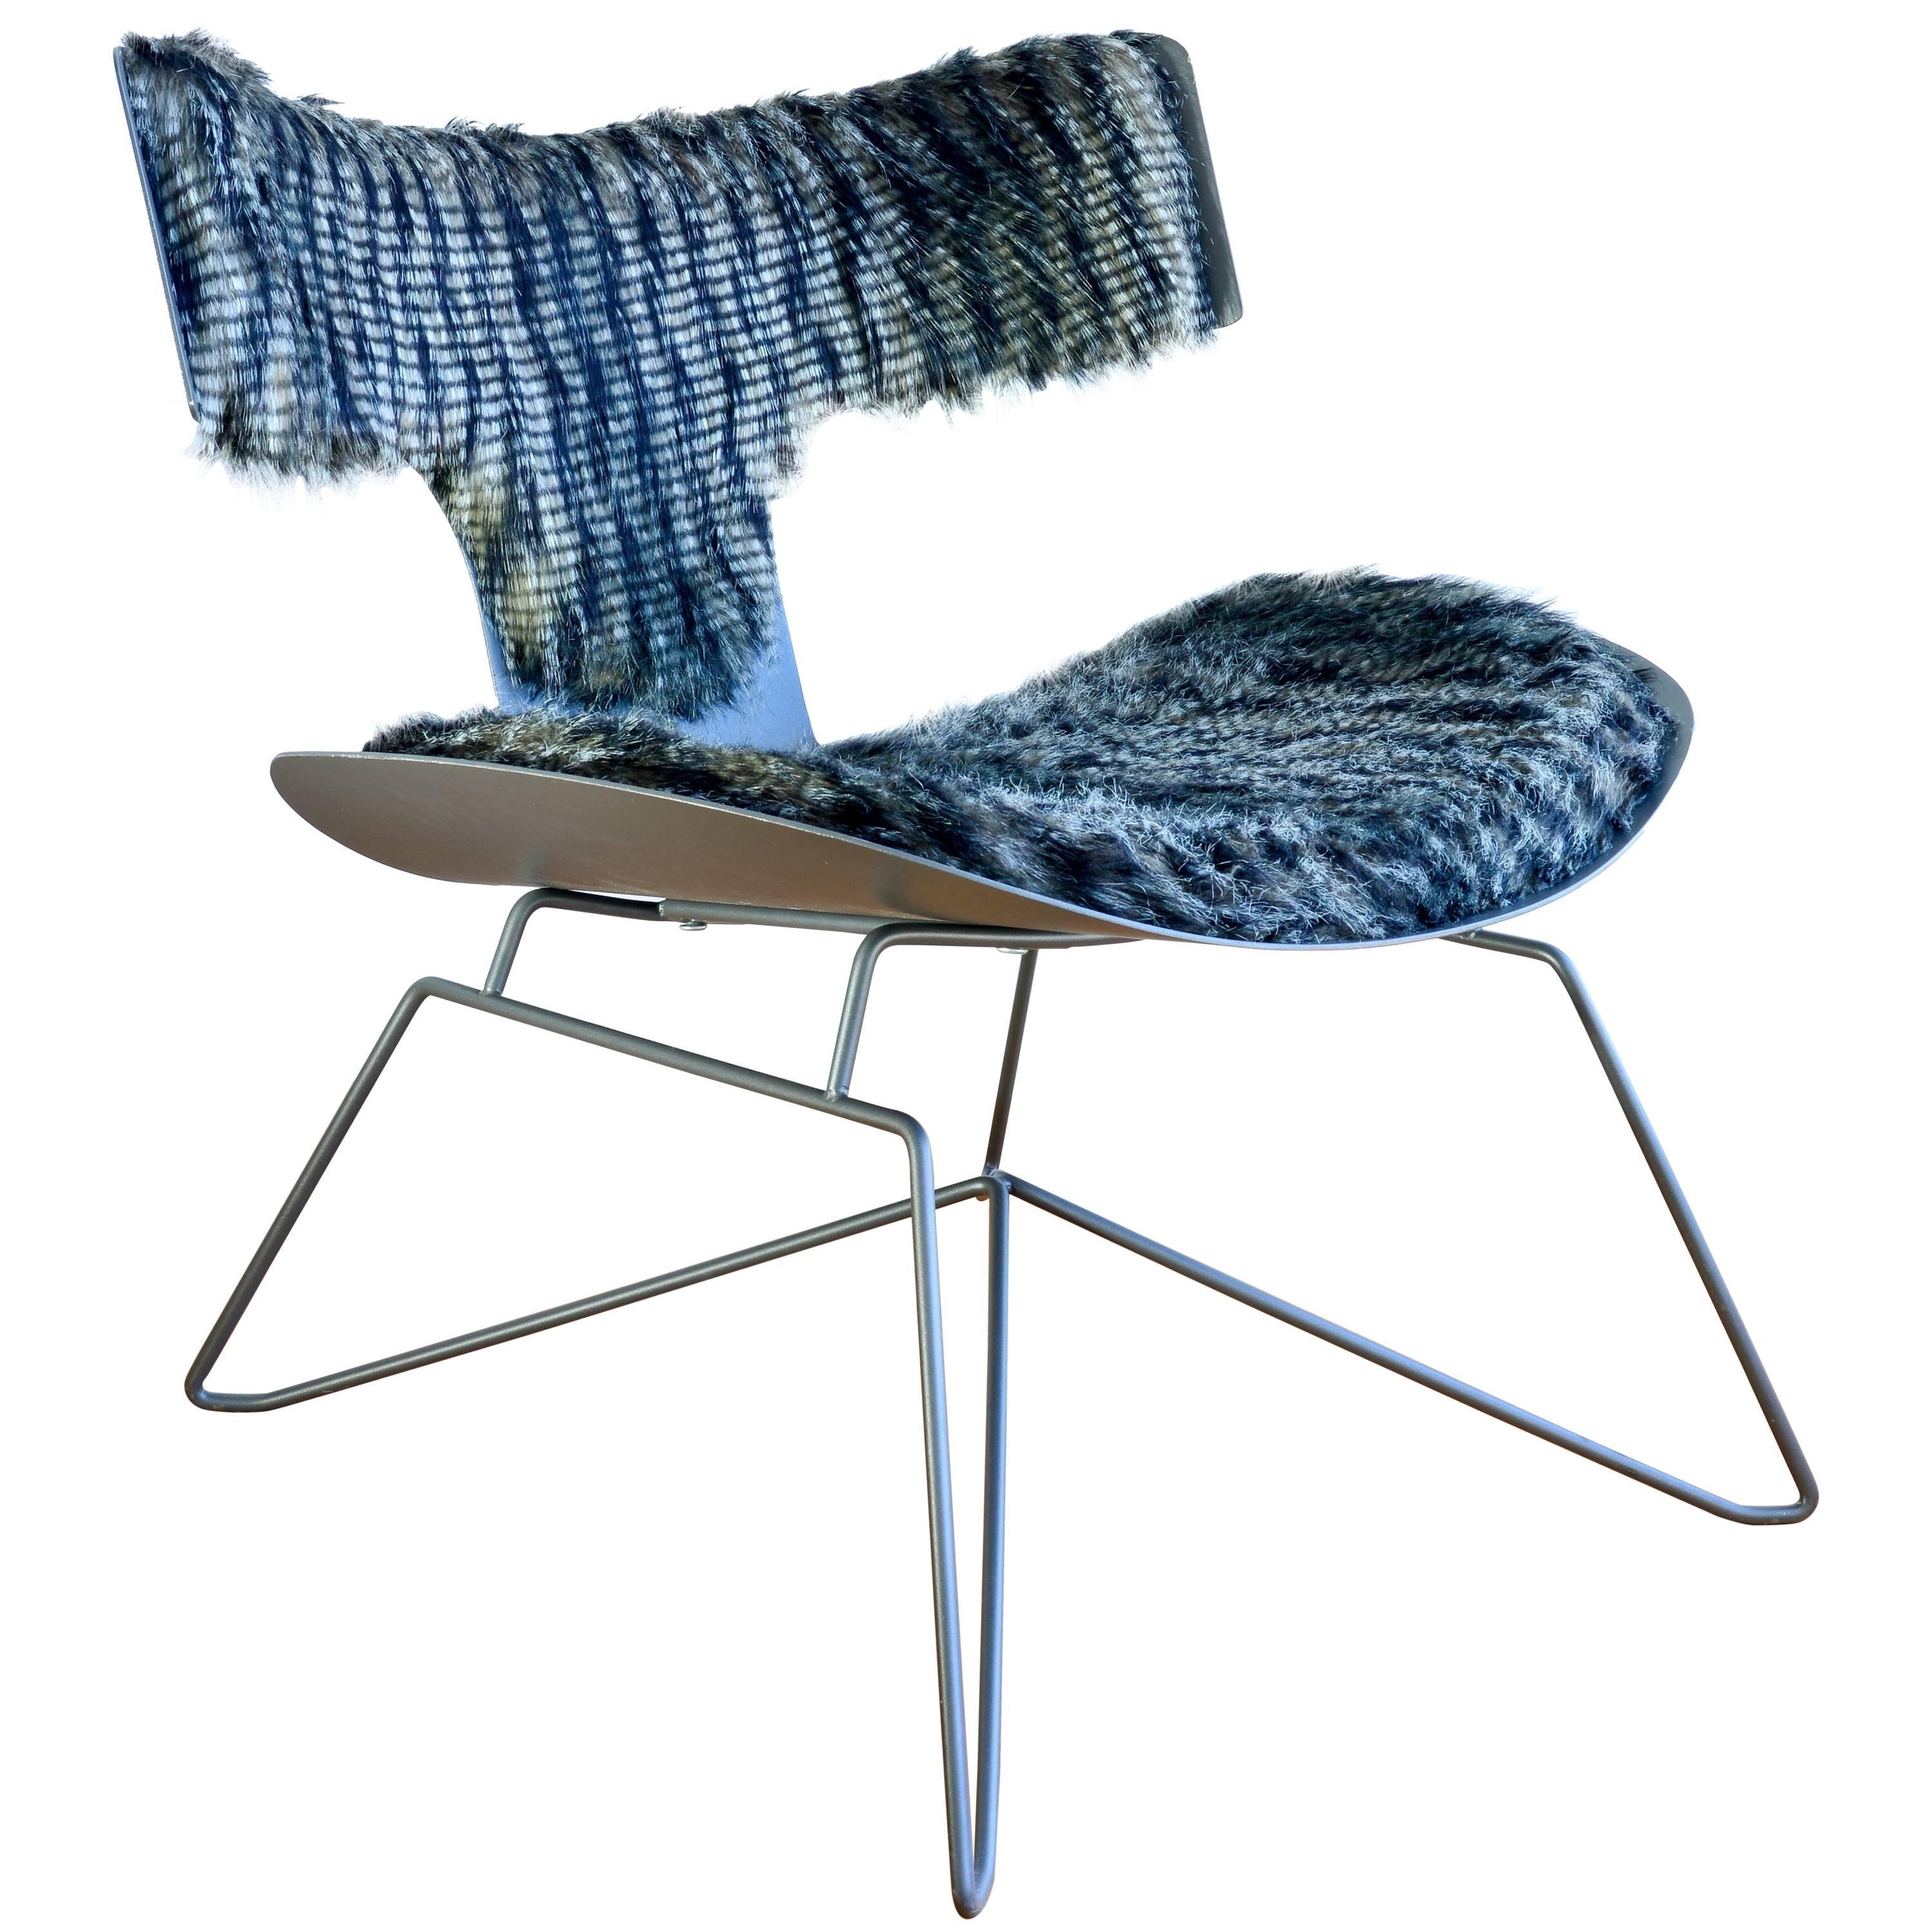 Powder Coated and Faux Fur Industrial-style Lounge Chair from France